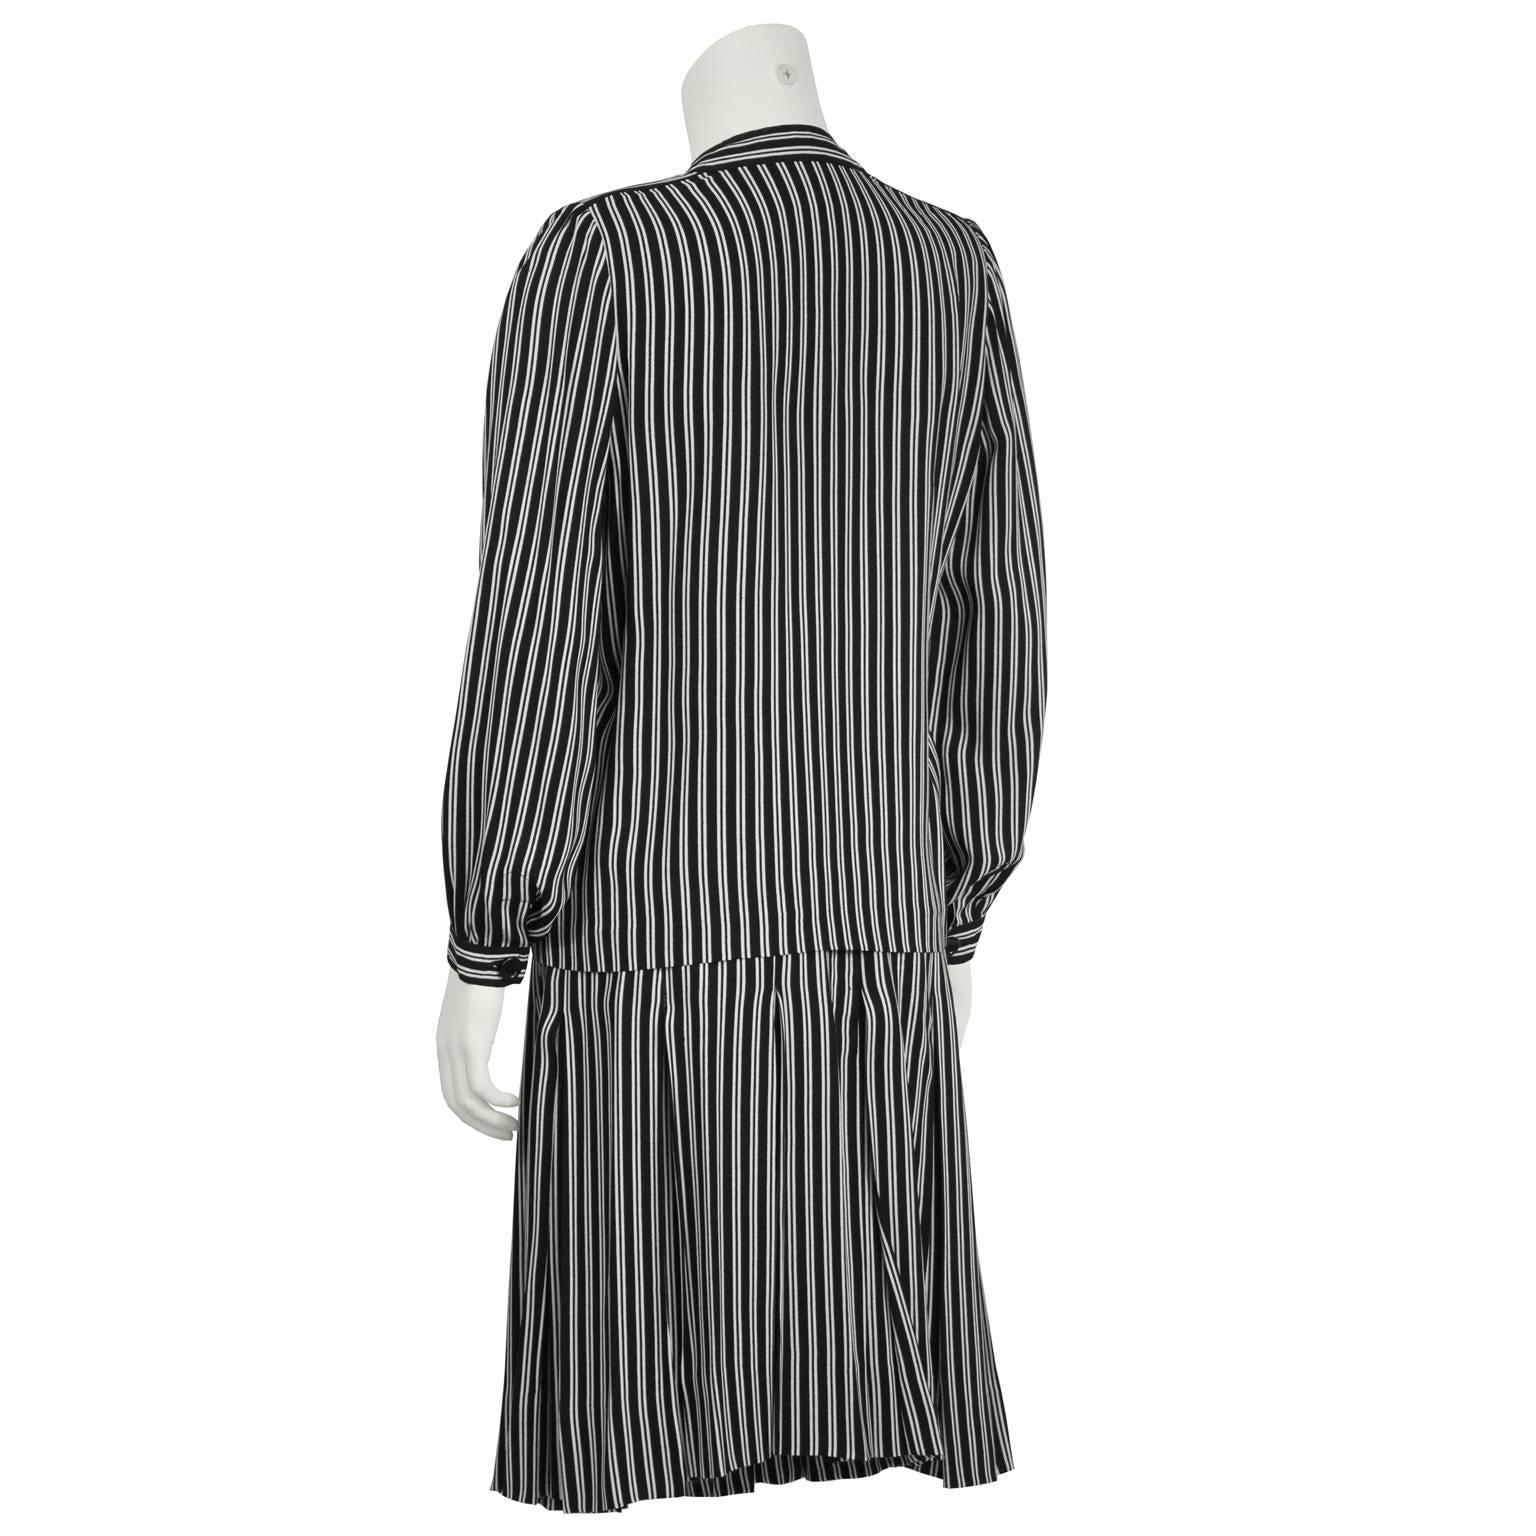 Chic Givenchy black and white striped set from the 1980's that can be worn separately or together. Top features a deep v-neck and a front button closure. Skirt is straight cut with a side zip closure. Excellent vintage condition. 

Top: Length 25